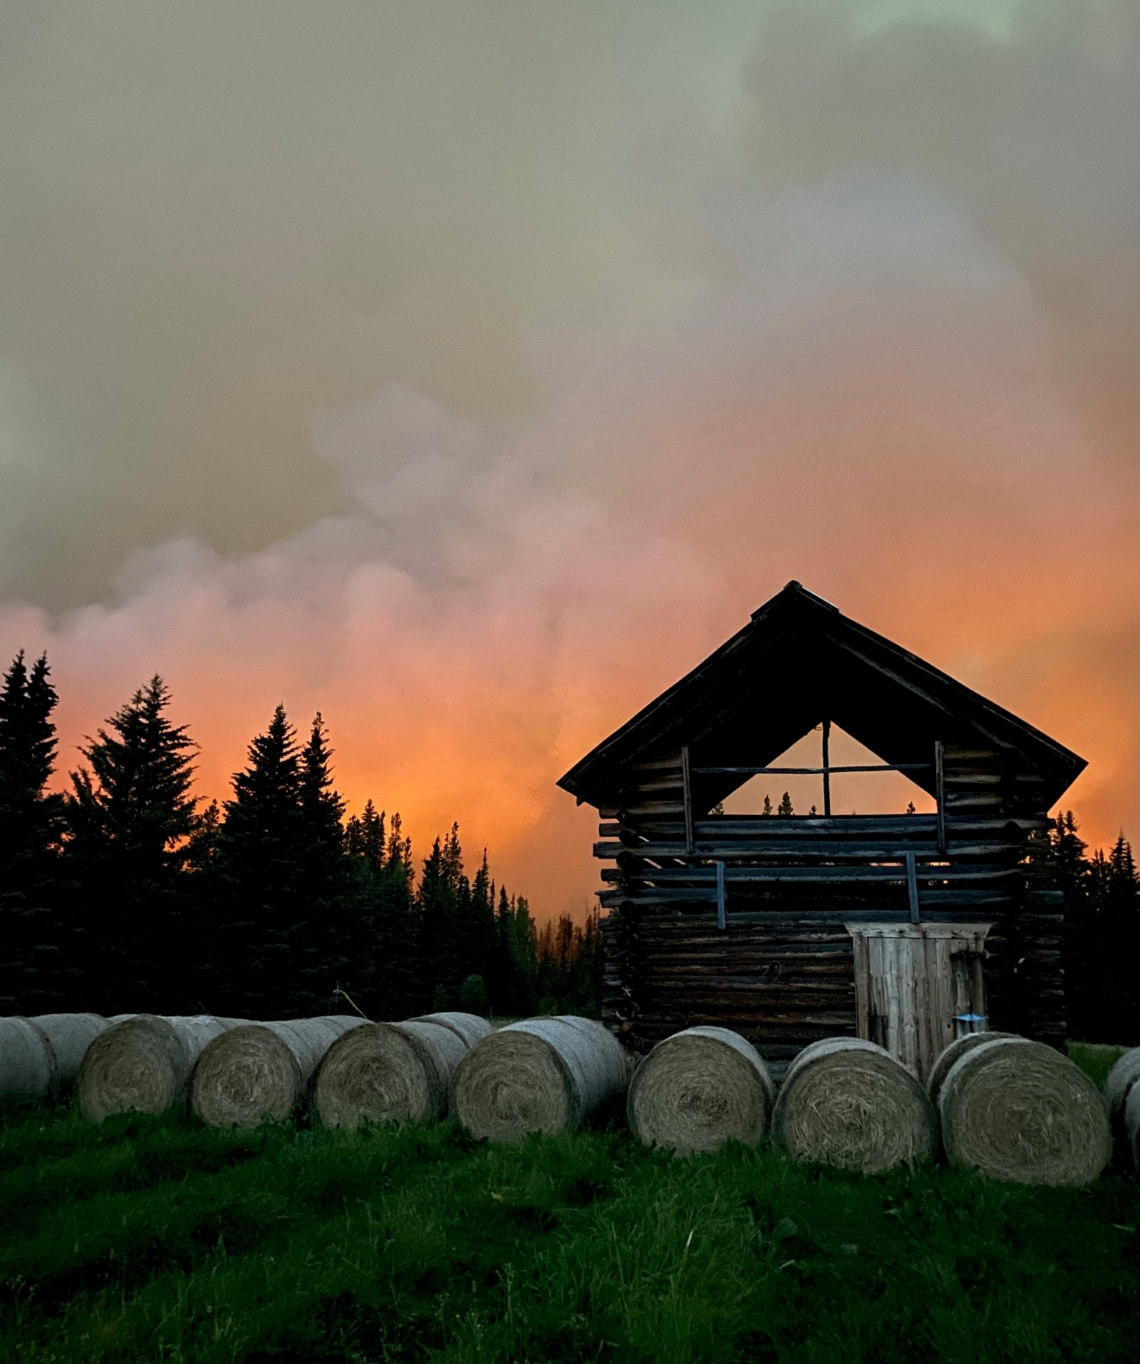 Silhouette of barn-like structure and hay bales backed by an orange, smoky sky from an approaching wildfire